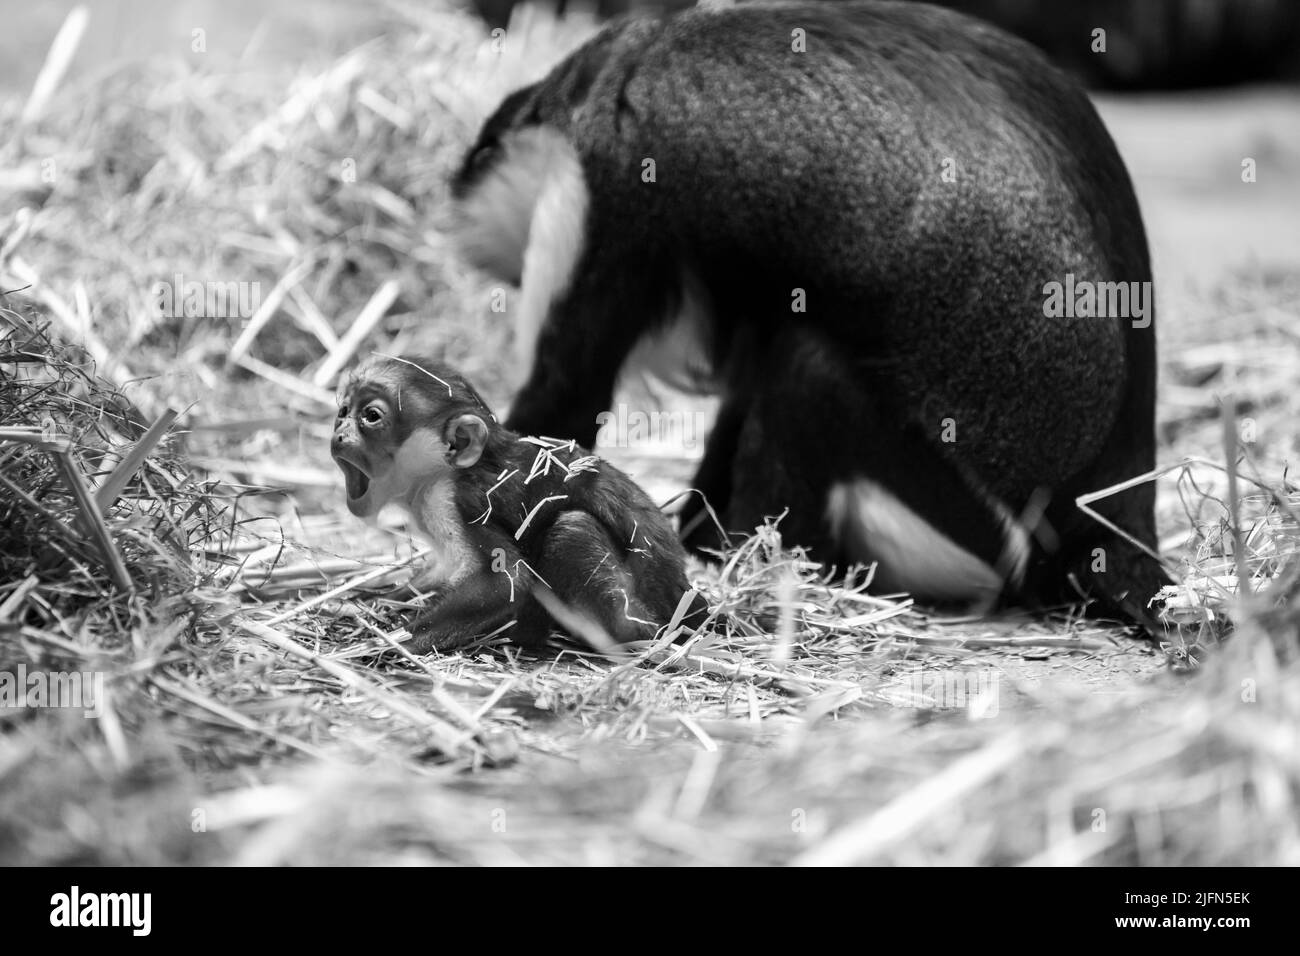 A closeup grayscale shot of a baby monkey with its parent on dry grass Stock Photo